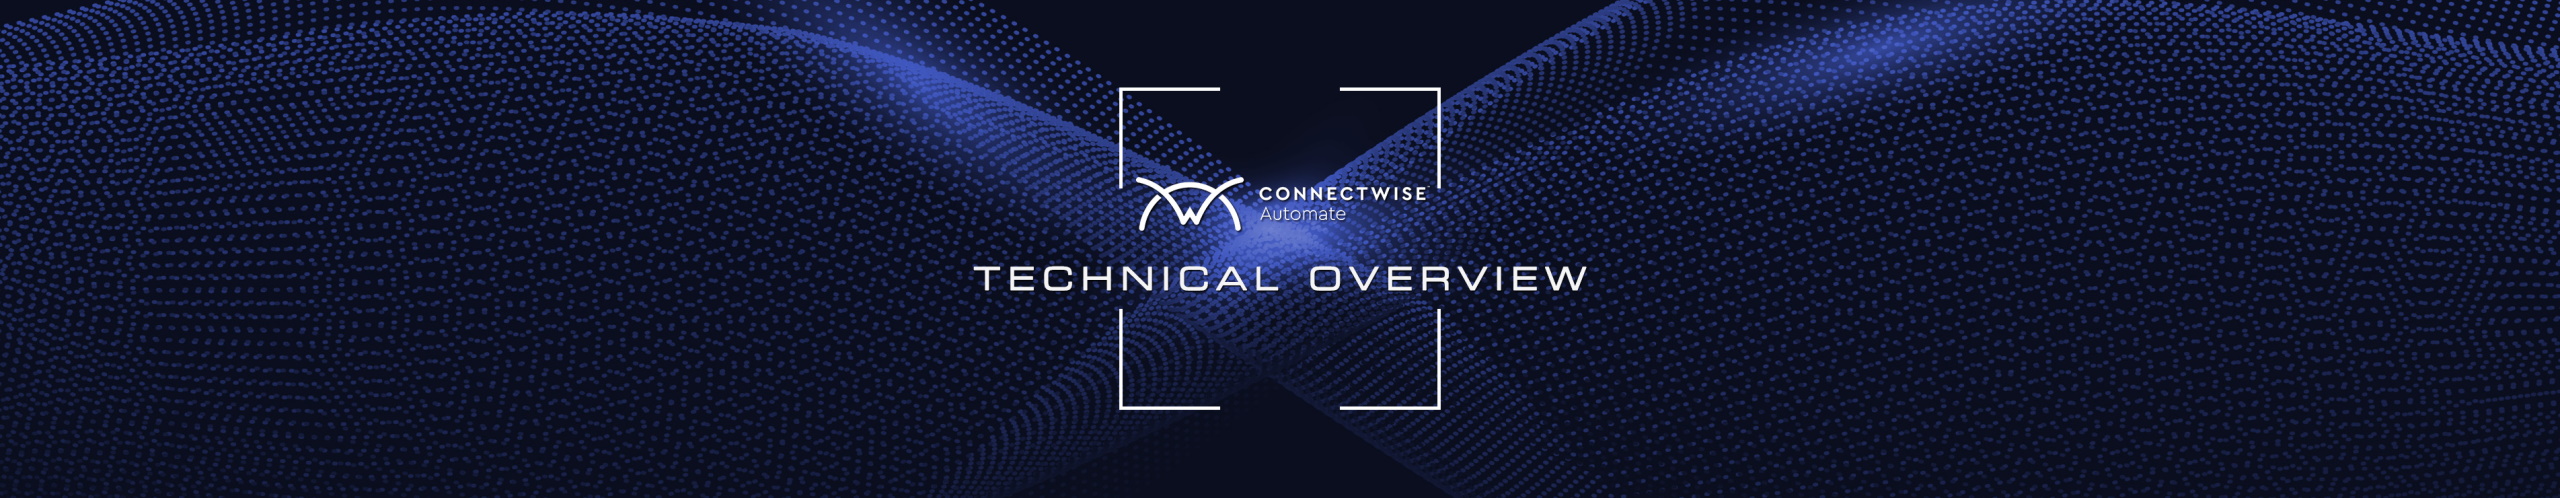 ConnectWise Technical Overview